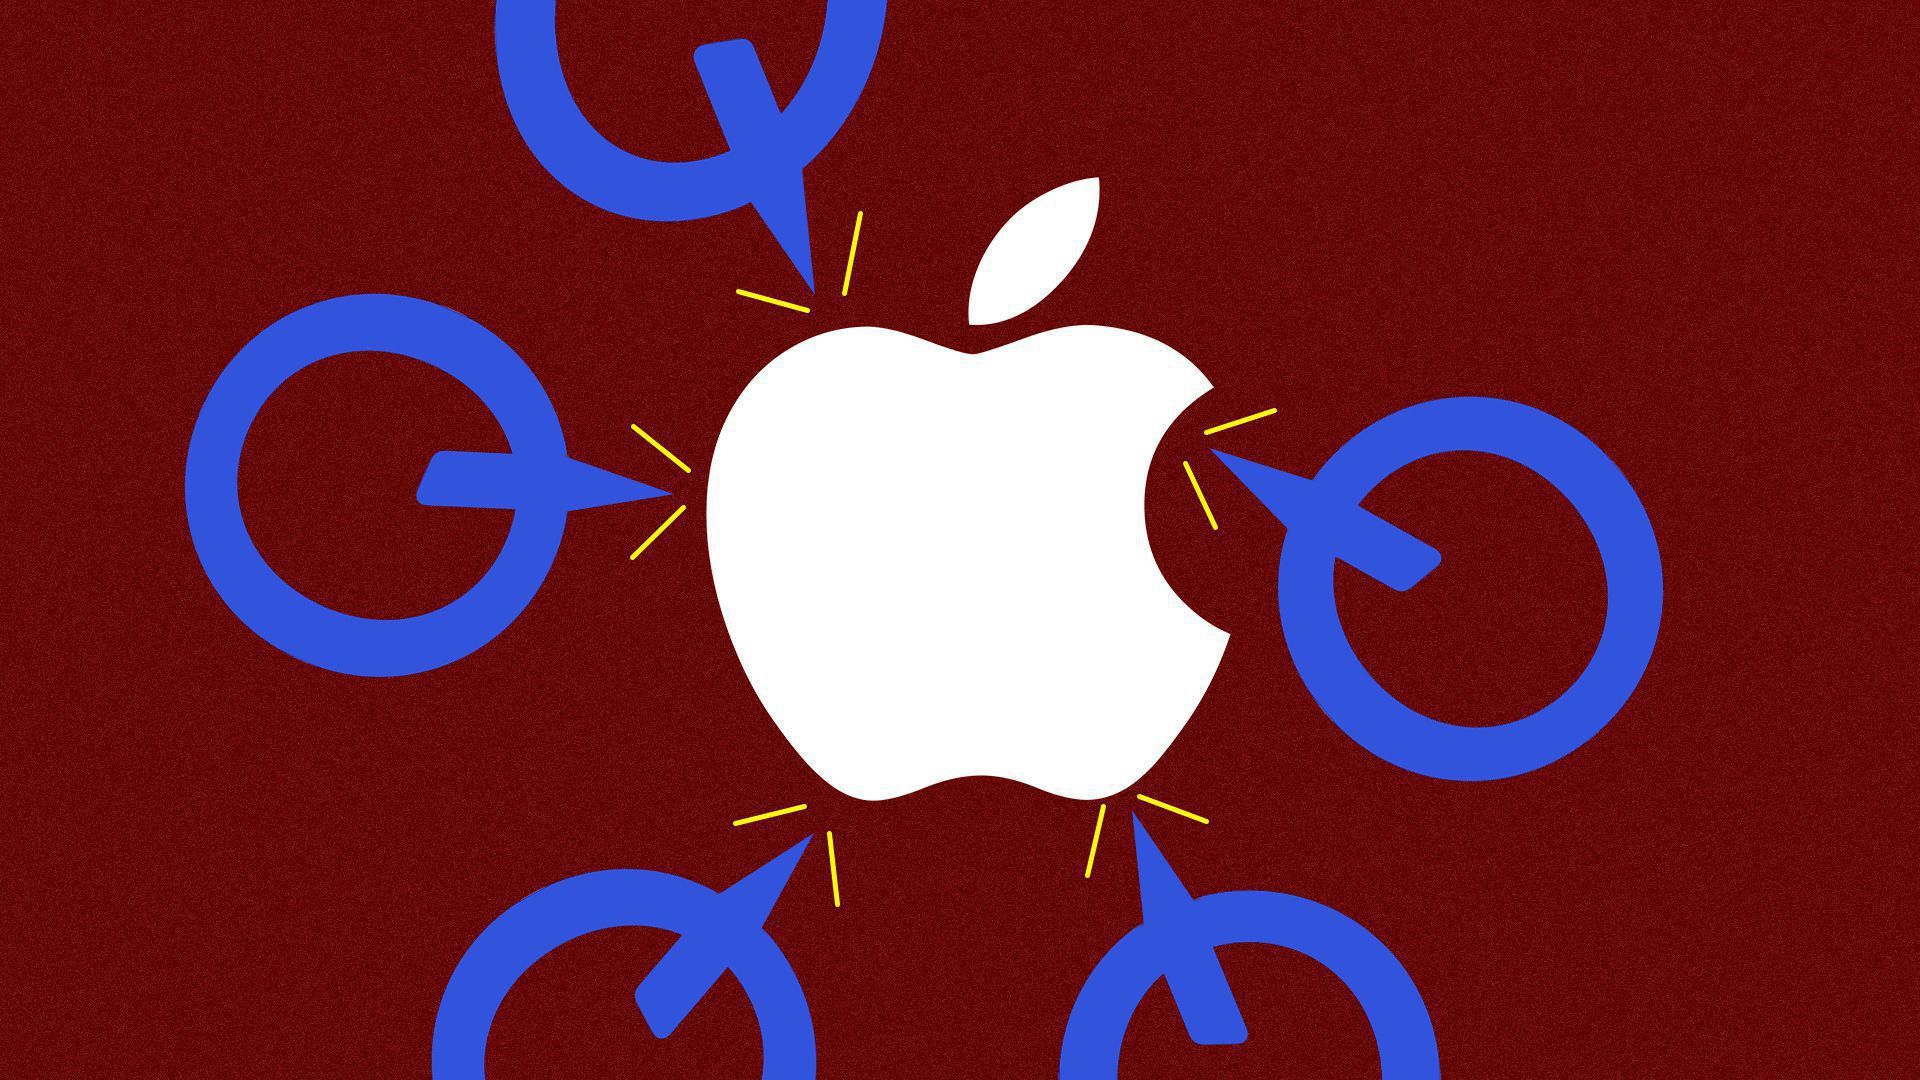 An illustration of Qualcomm logos with arrows pointing at an Apple logo